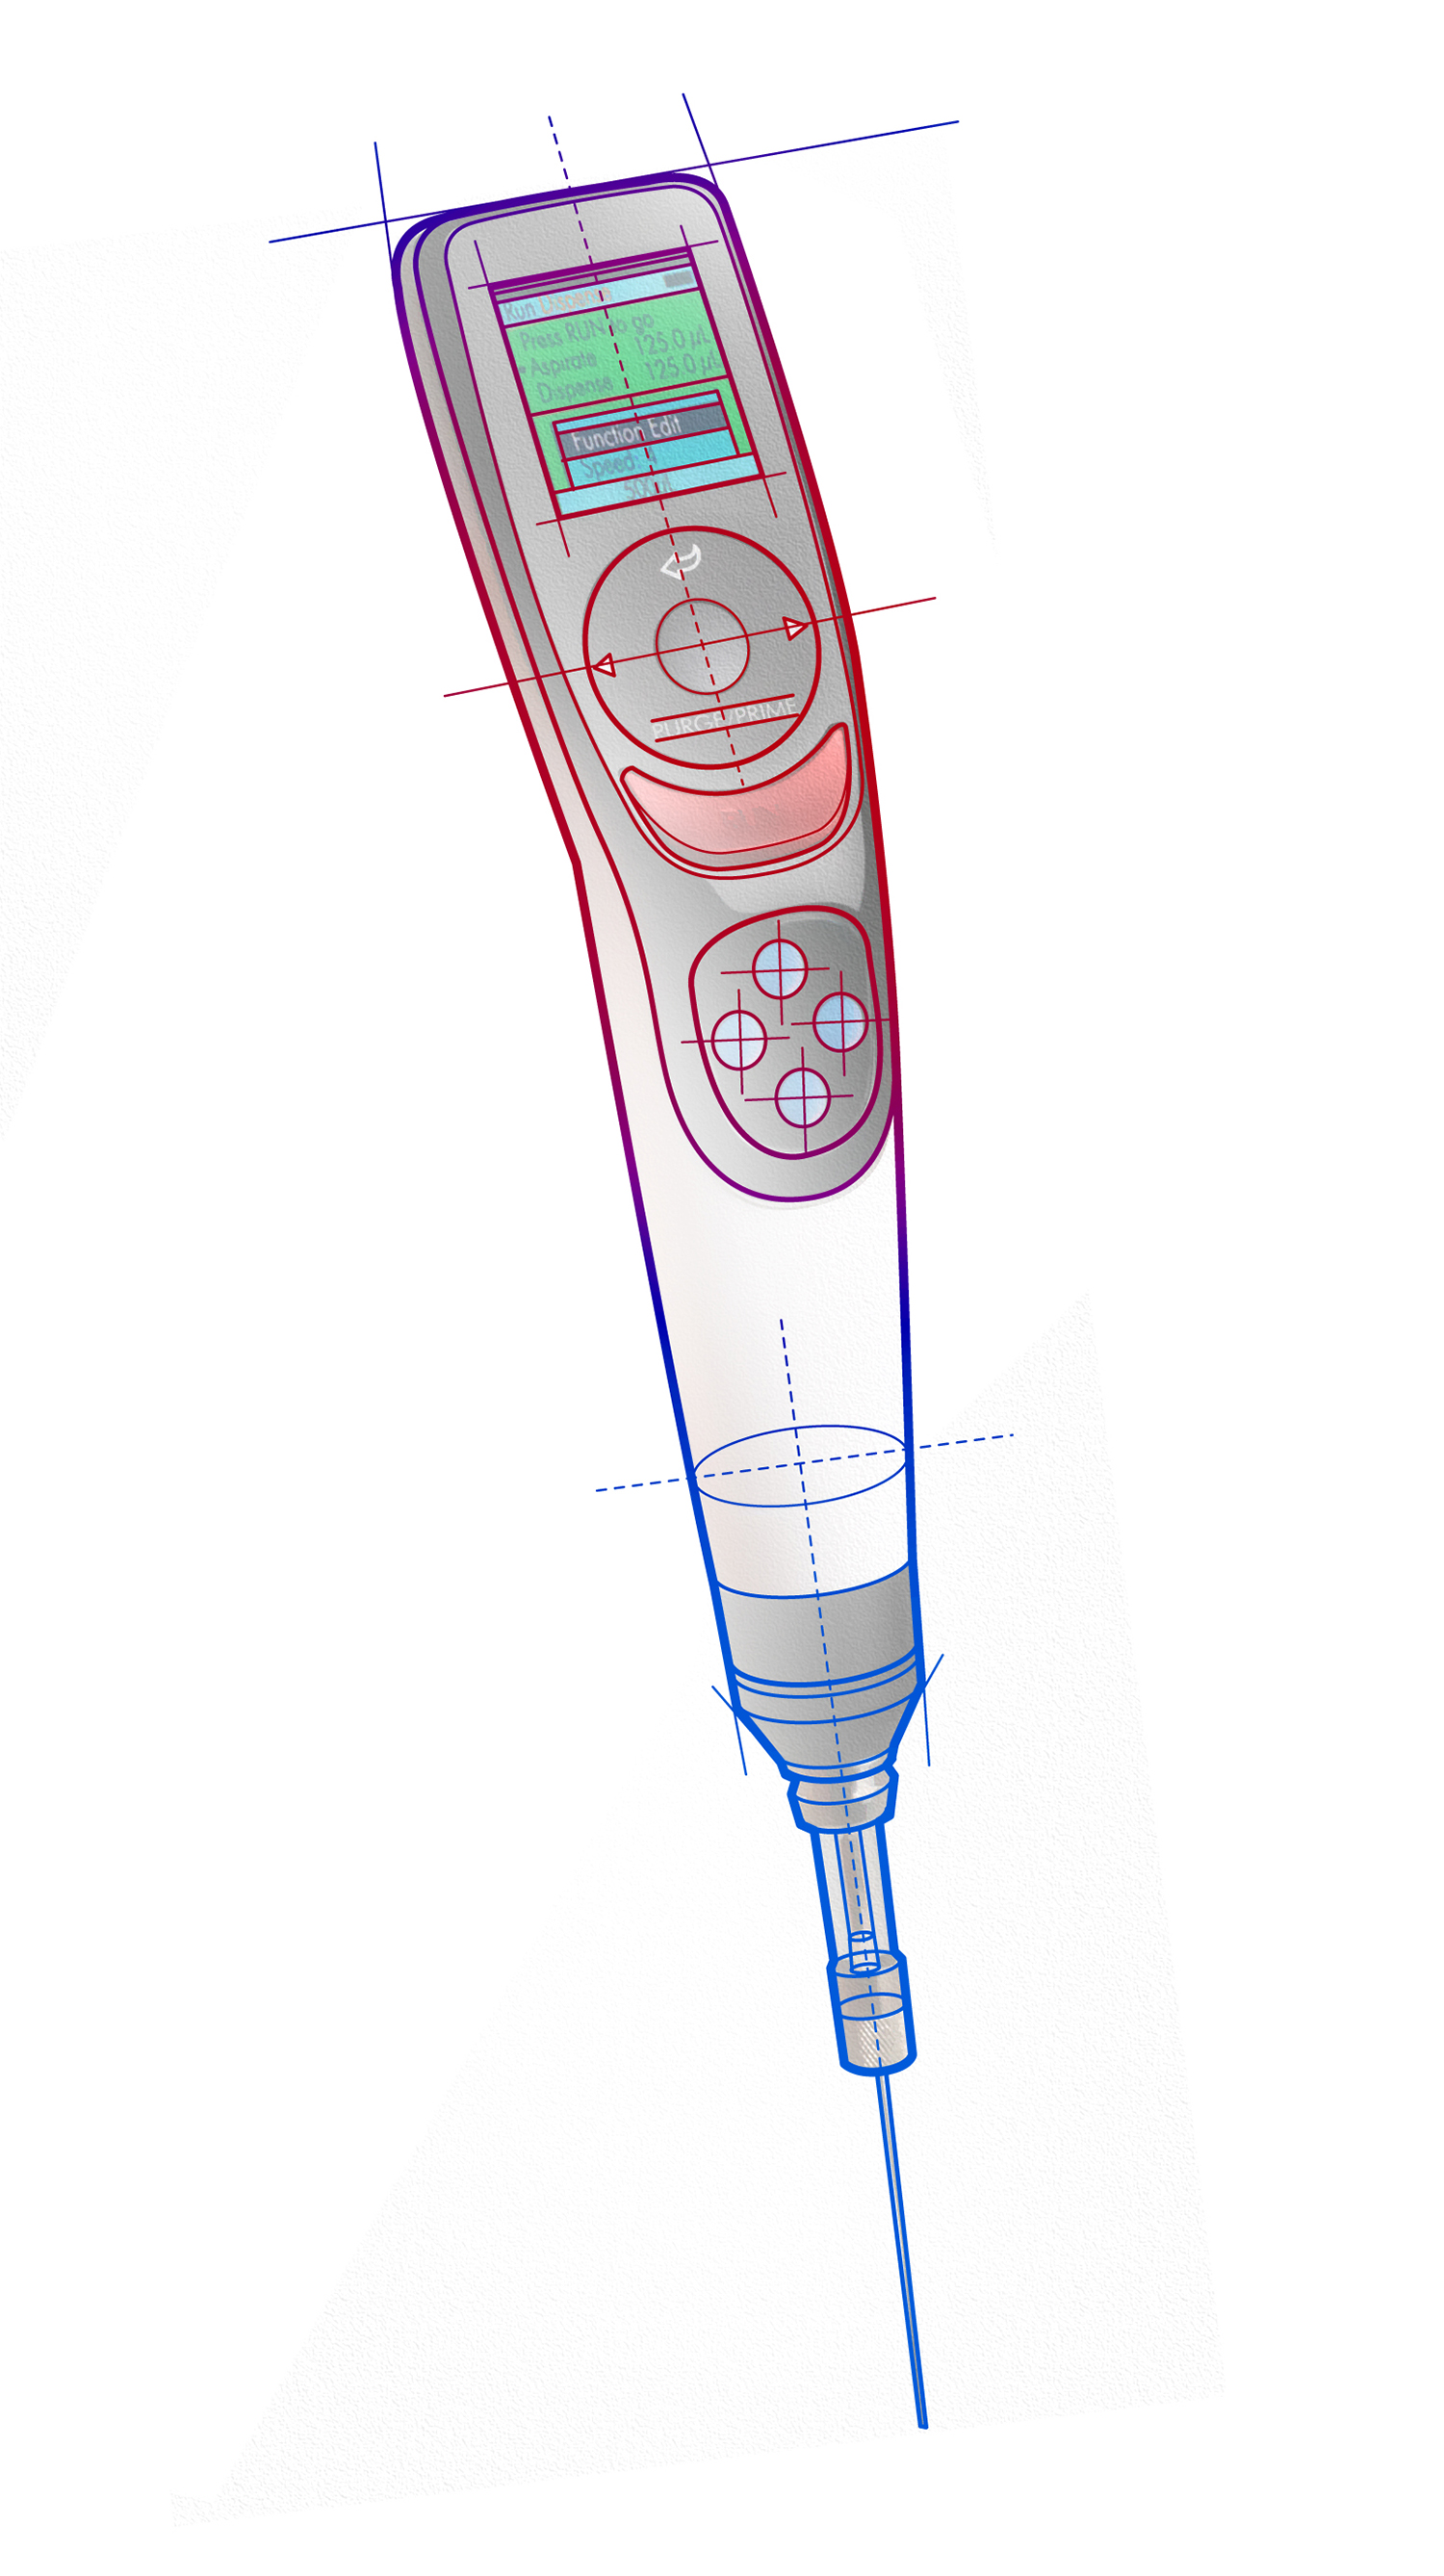 Electronic pipette design example.